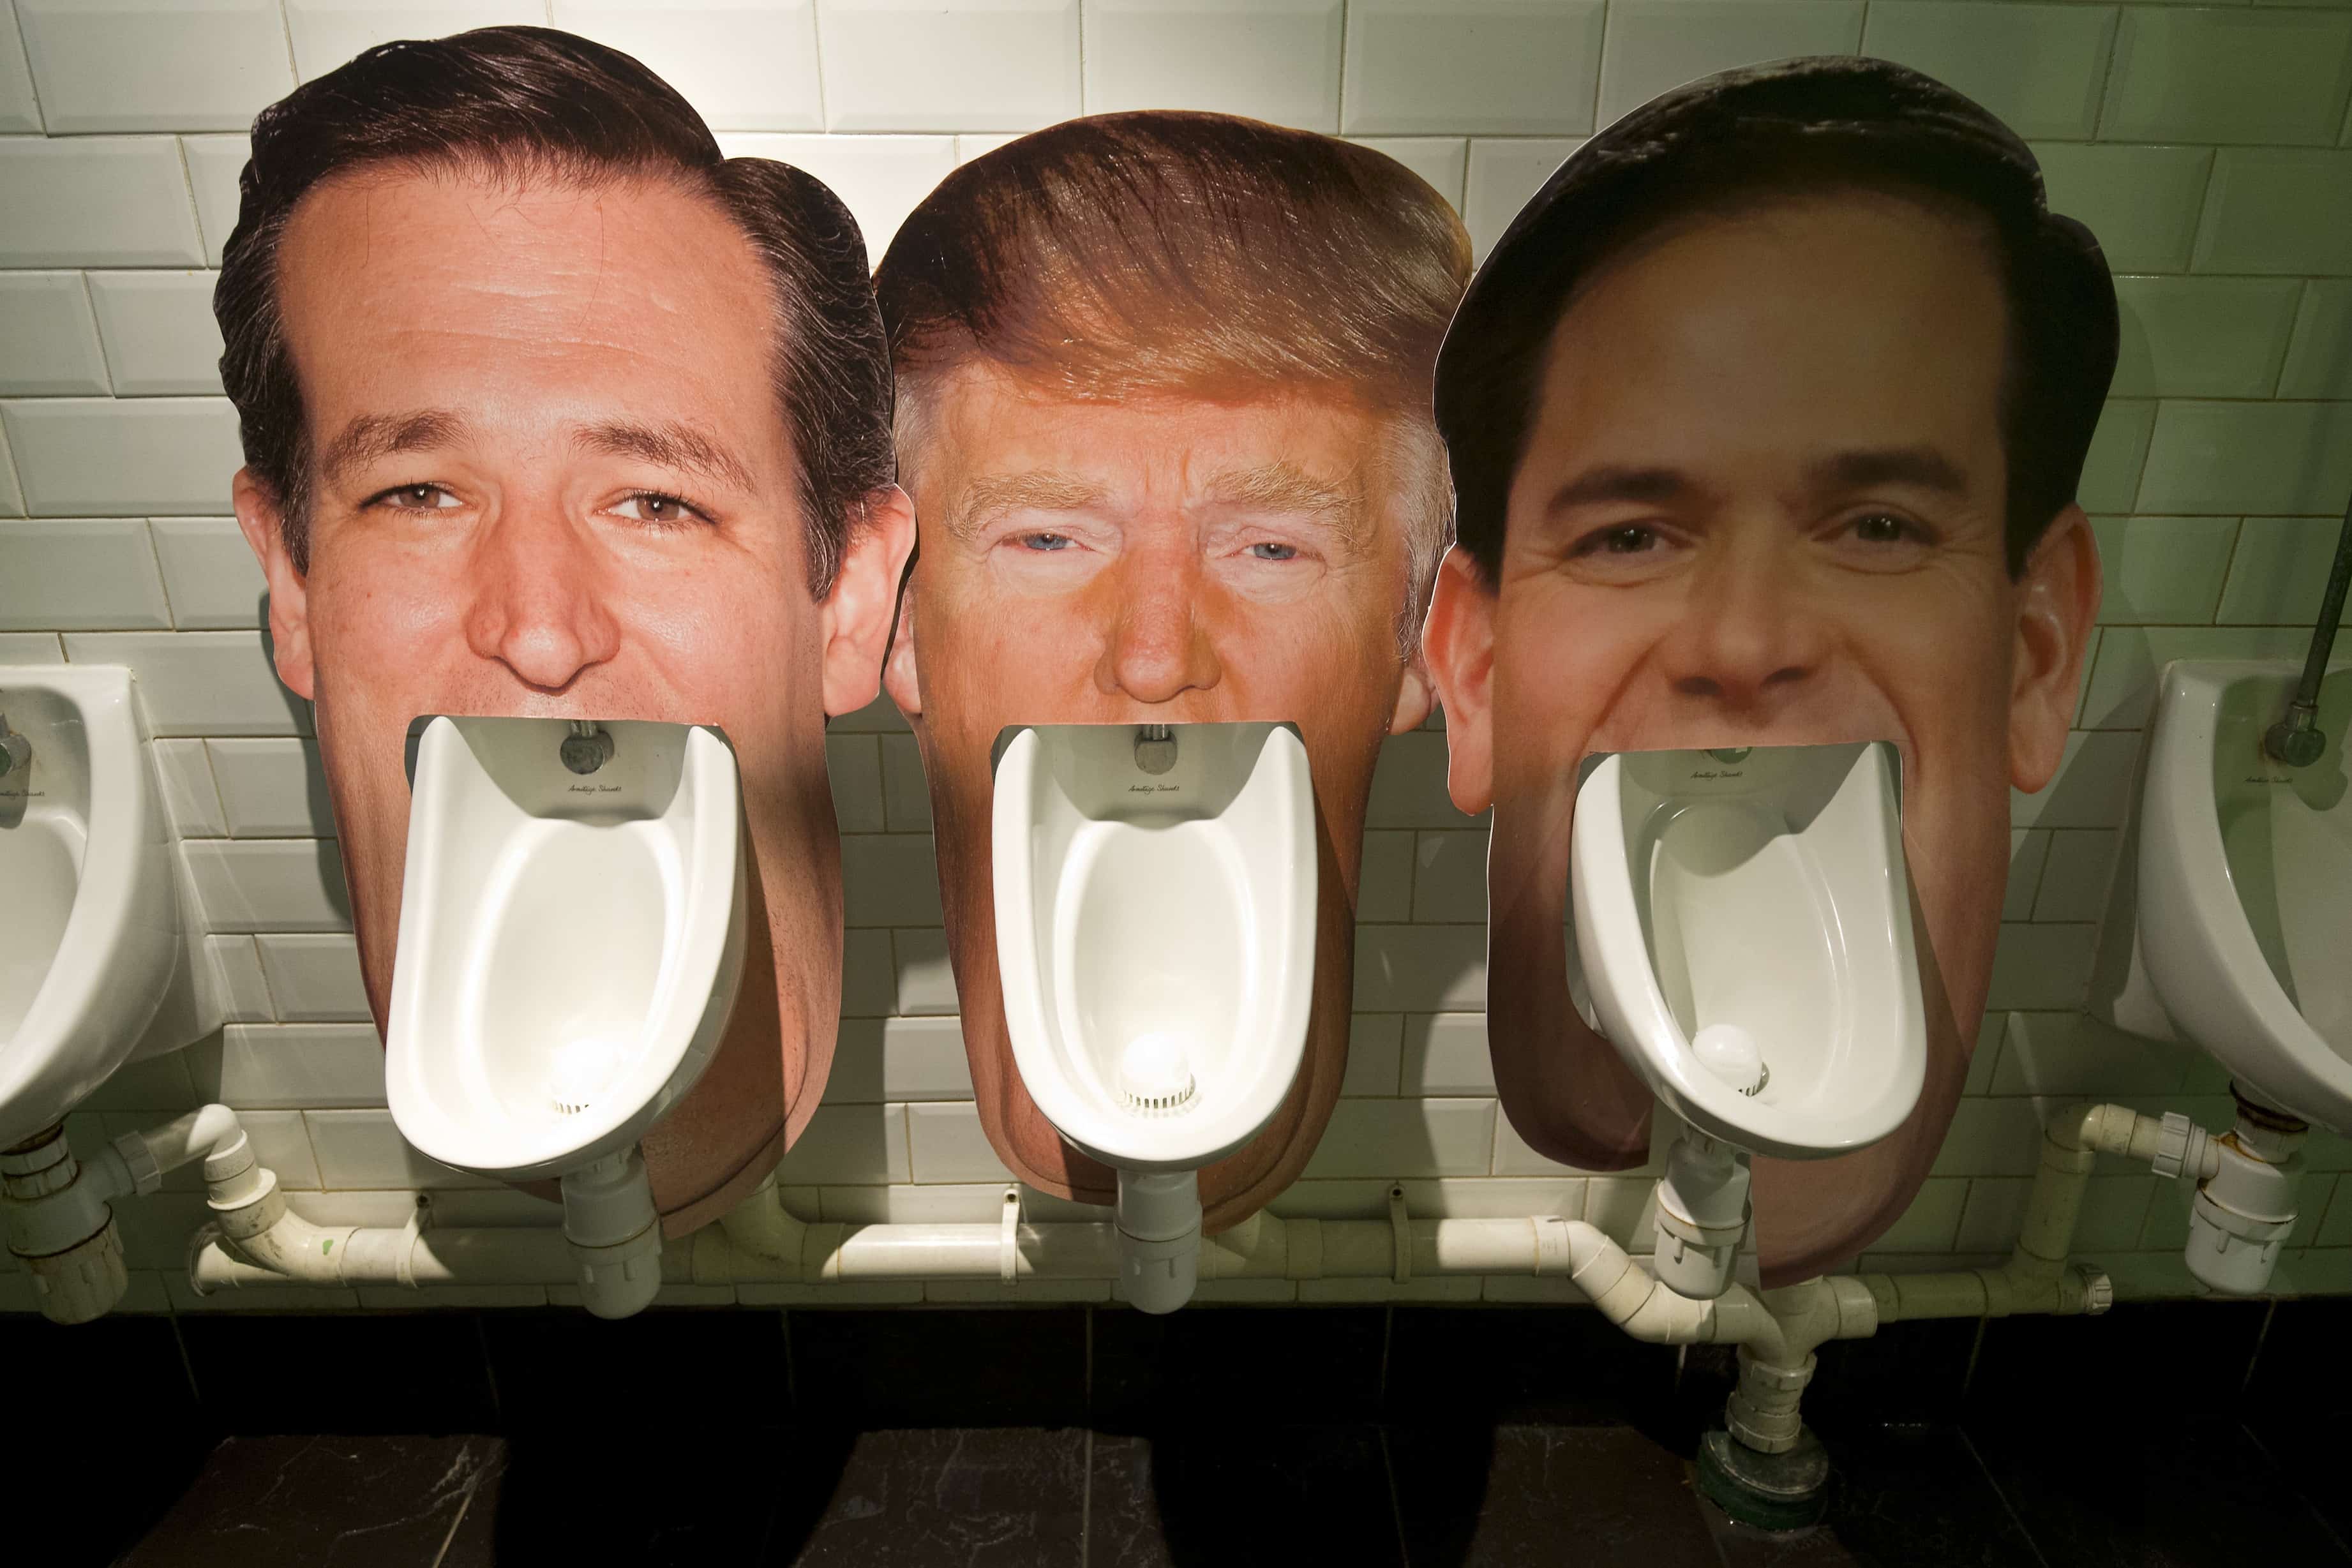 Trump mexico; Cardboard cutouts of Republican presidential candidates (left to right) Ted Cruz, Donald Trump and Marco Rubio